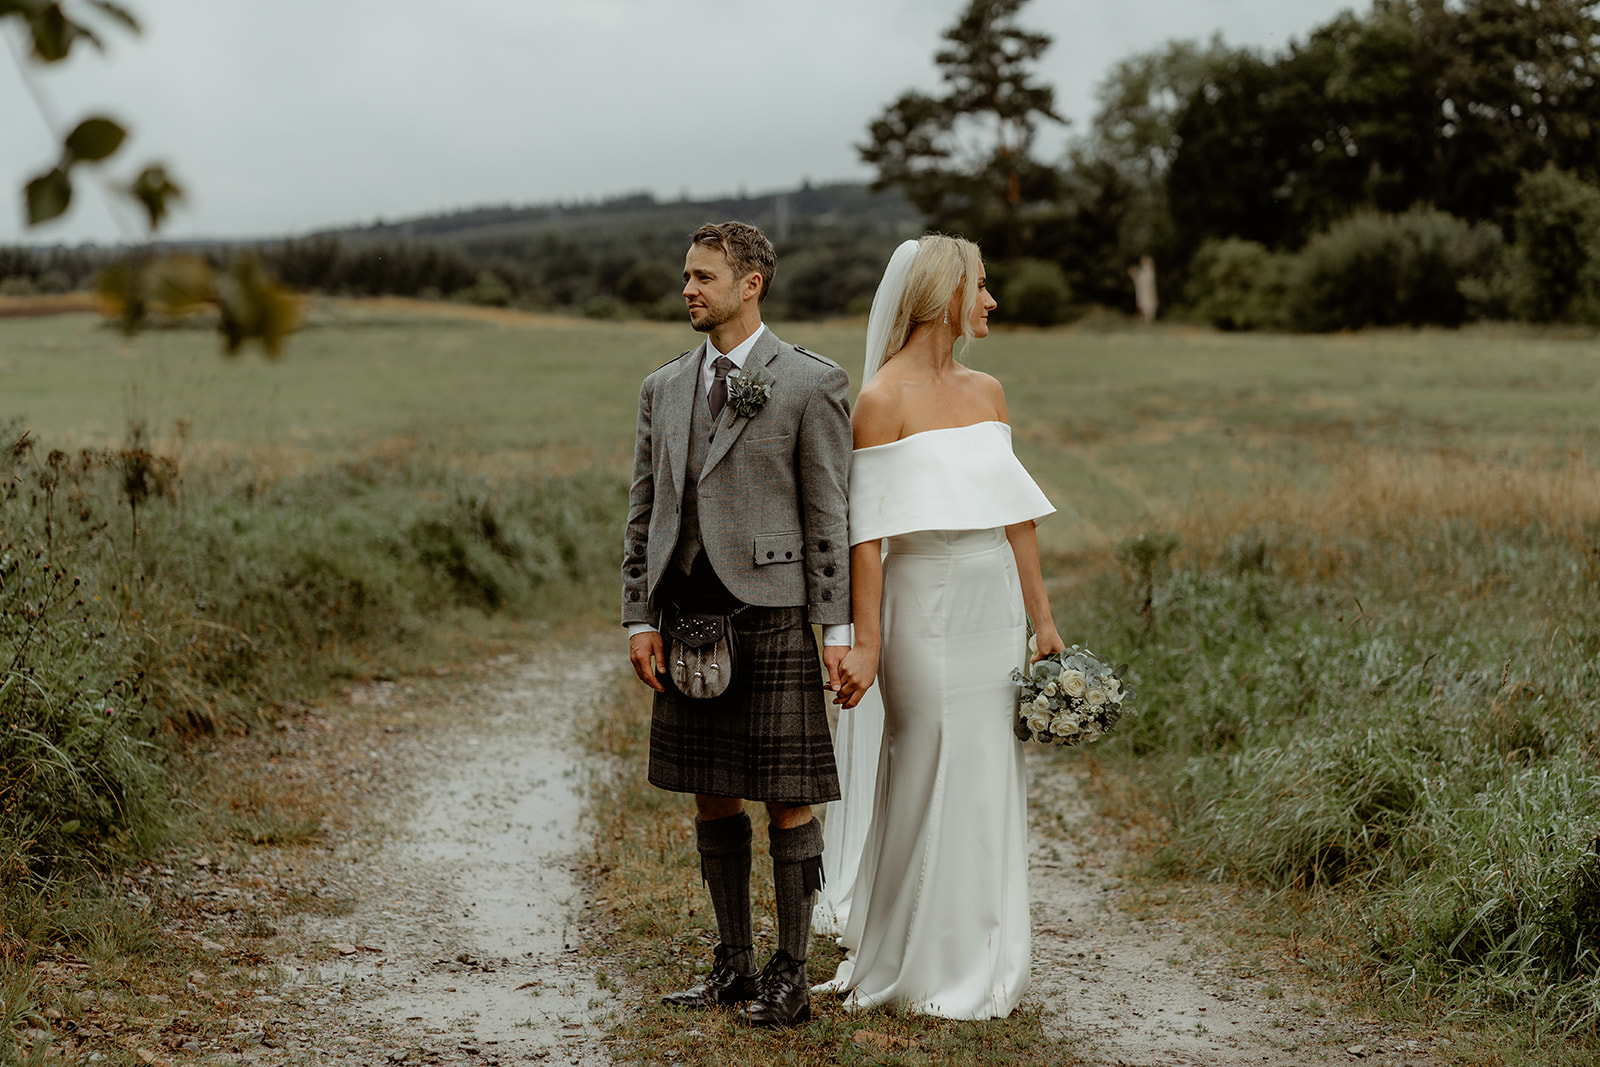 Bride and groom stand side by side holding hands and looking in opposite directions with field in the background